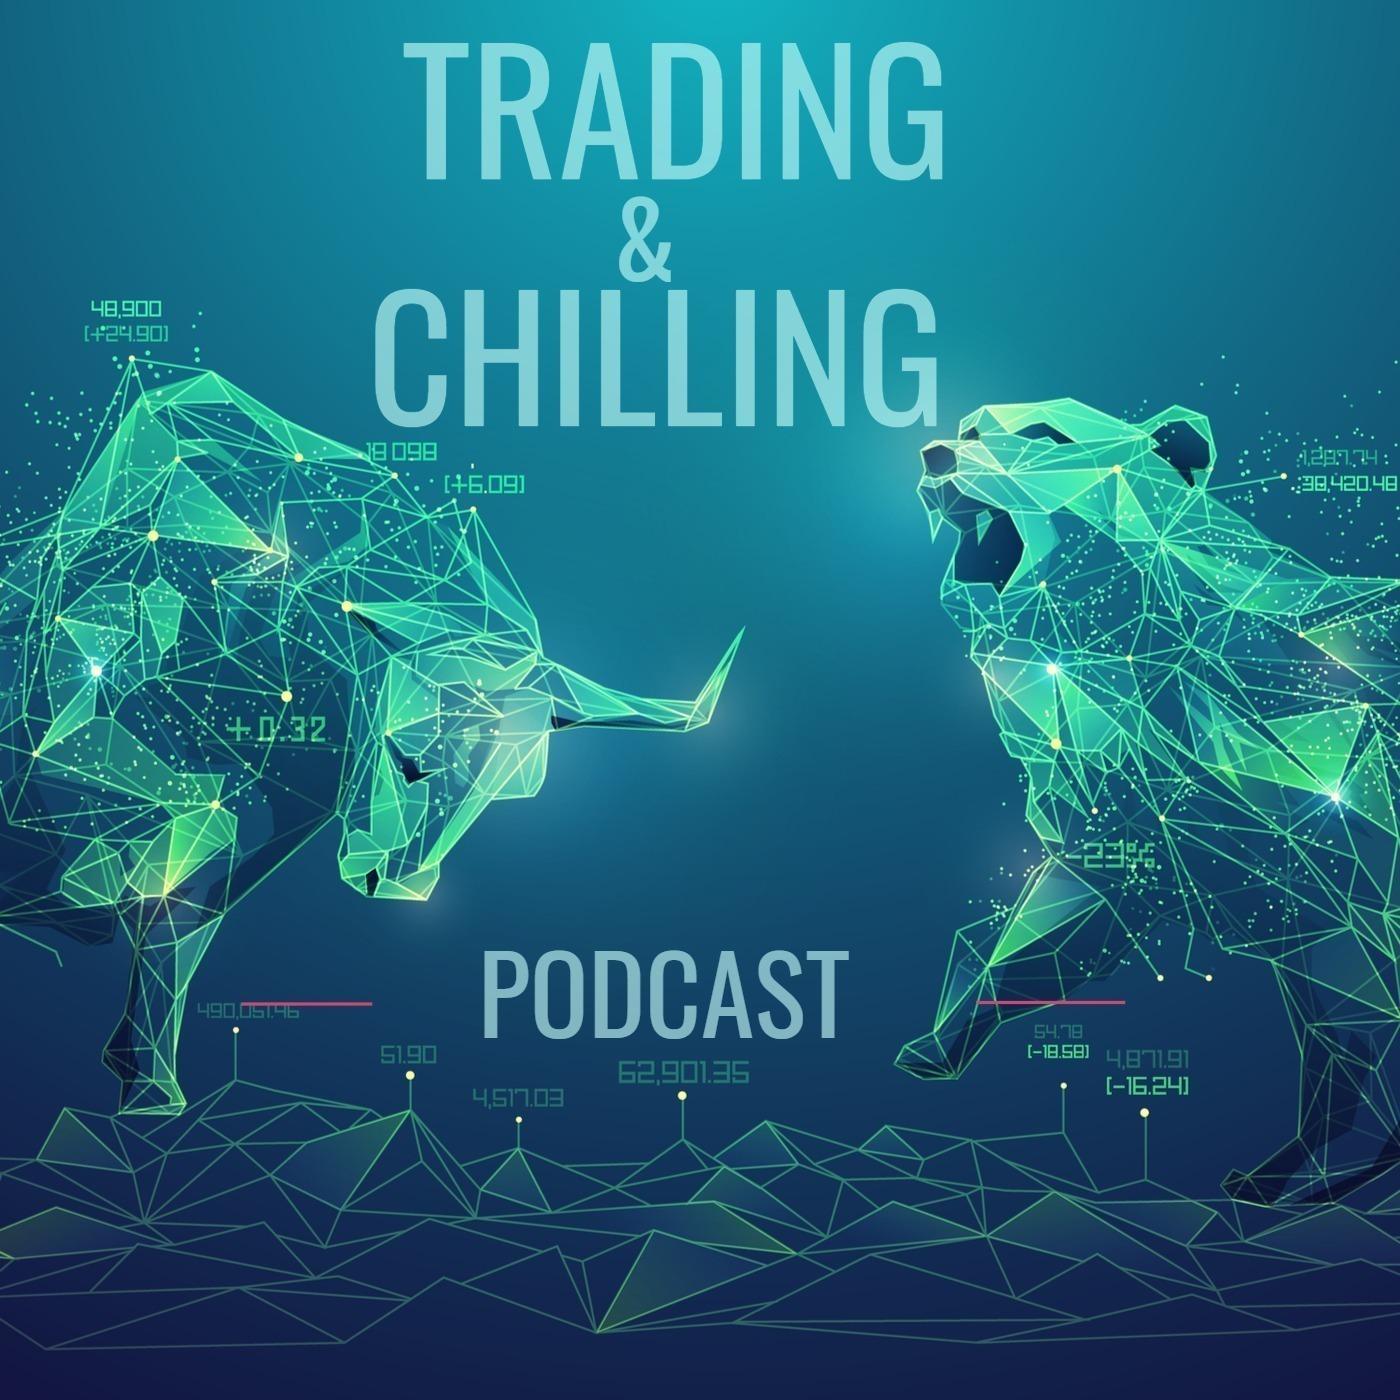 Trading&Chilling